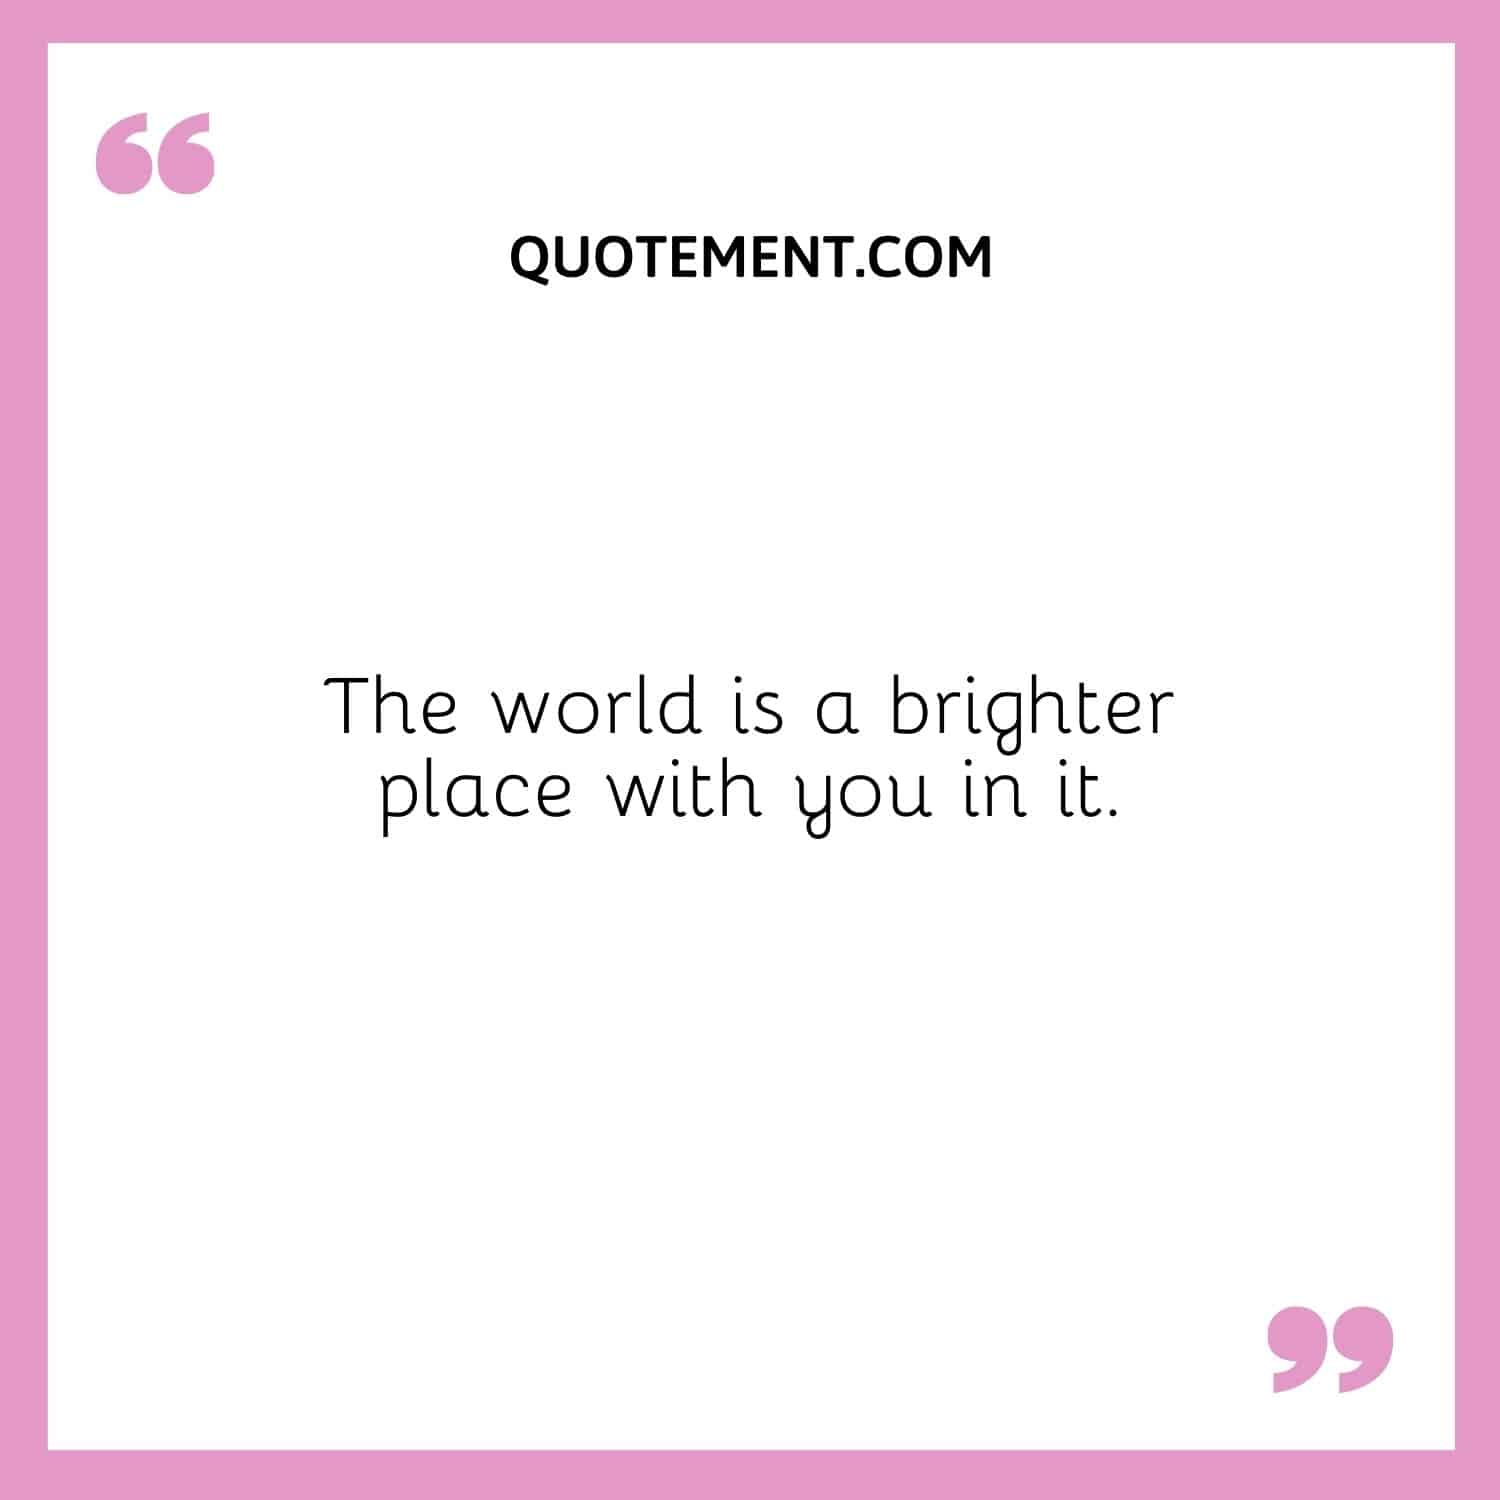 The world is a brighter place with you in it.